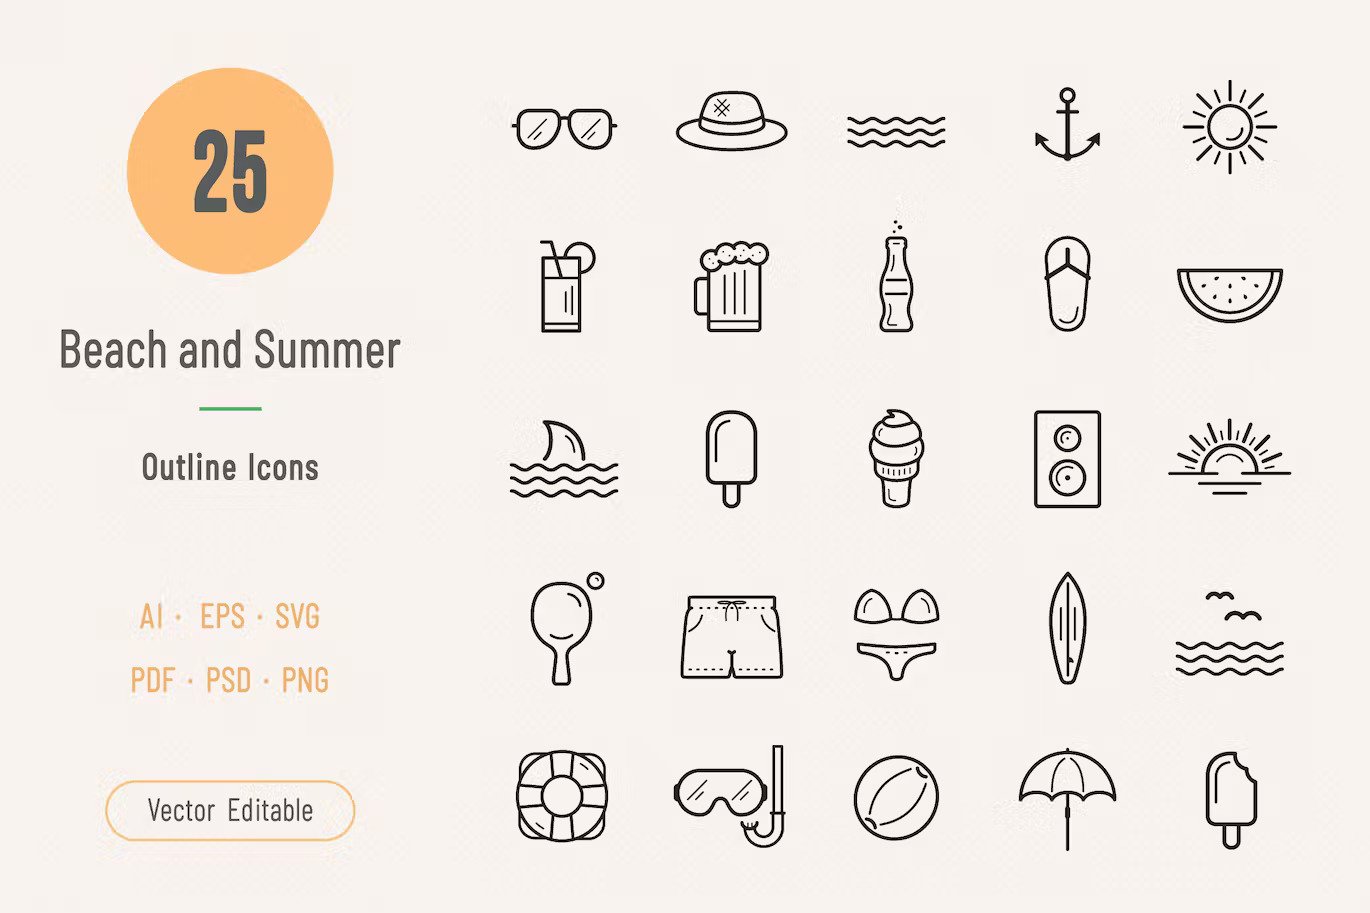 A beach and summer outline icon set